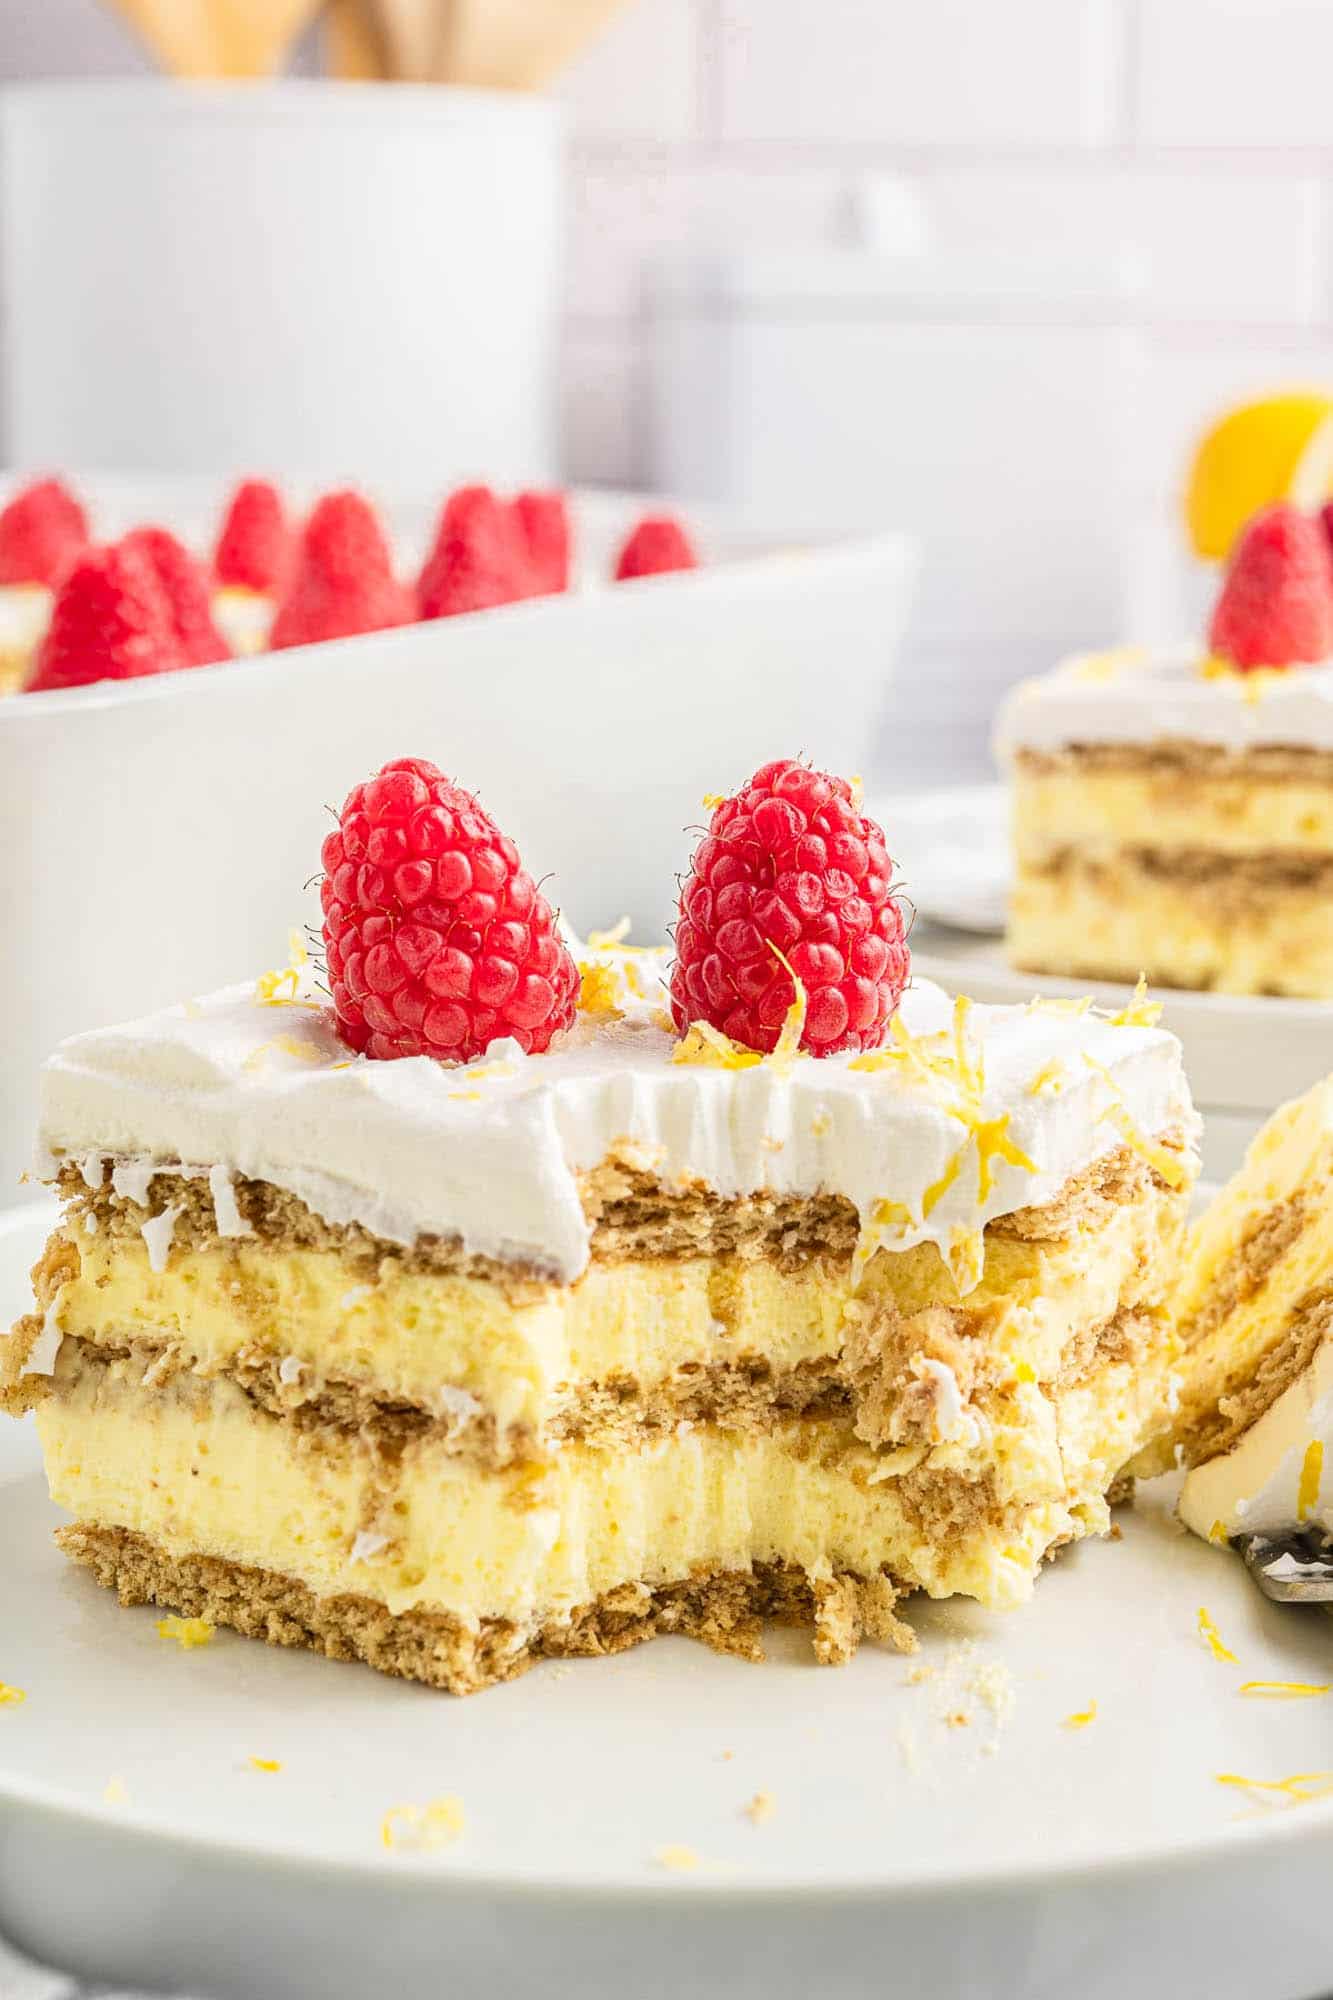 A square piece of graham cracker and Lemon pudding icebox cake with a bite taken off one corner, garnished with fresh raspberries and lemon zest.